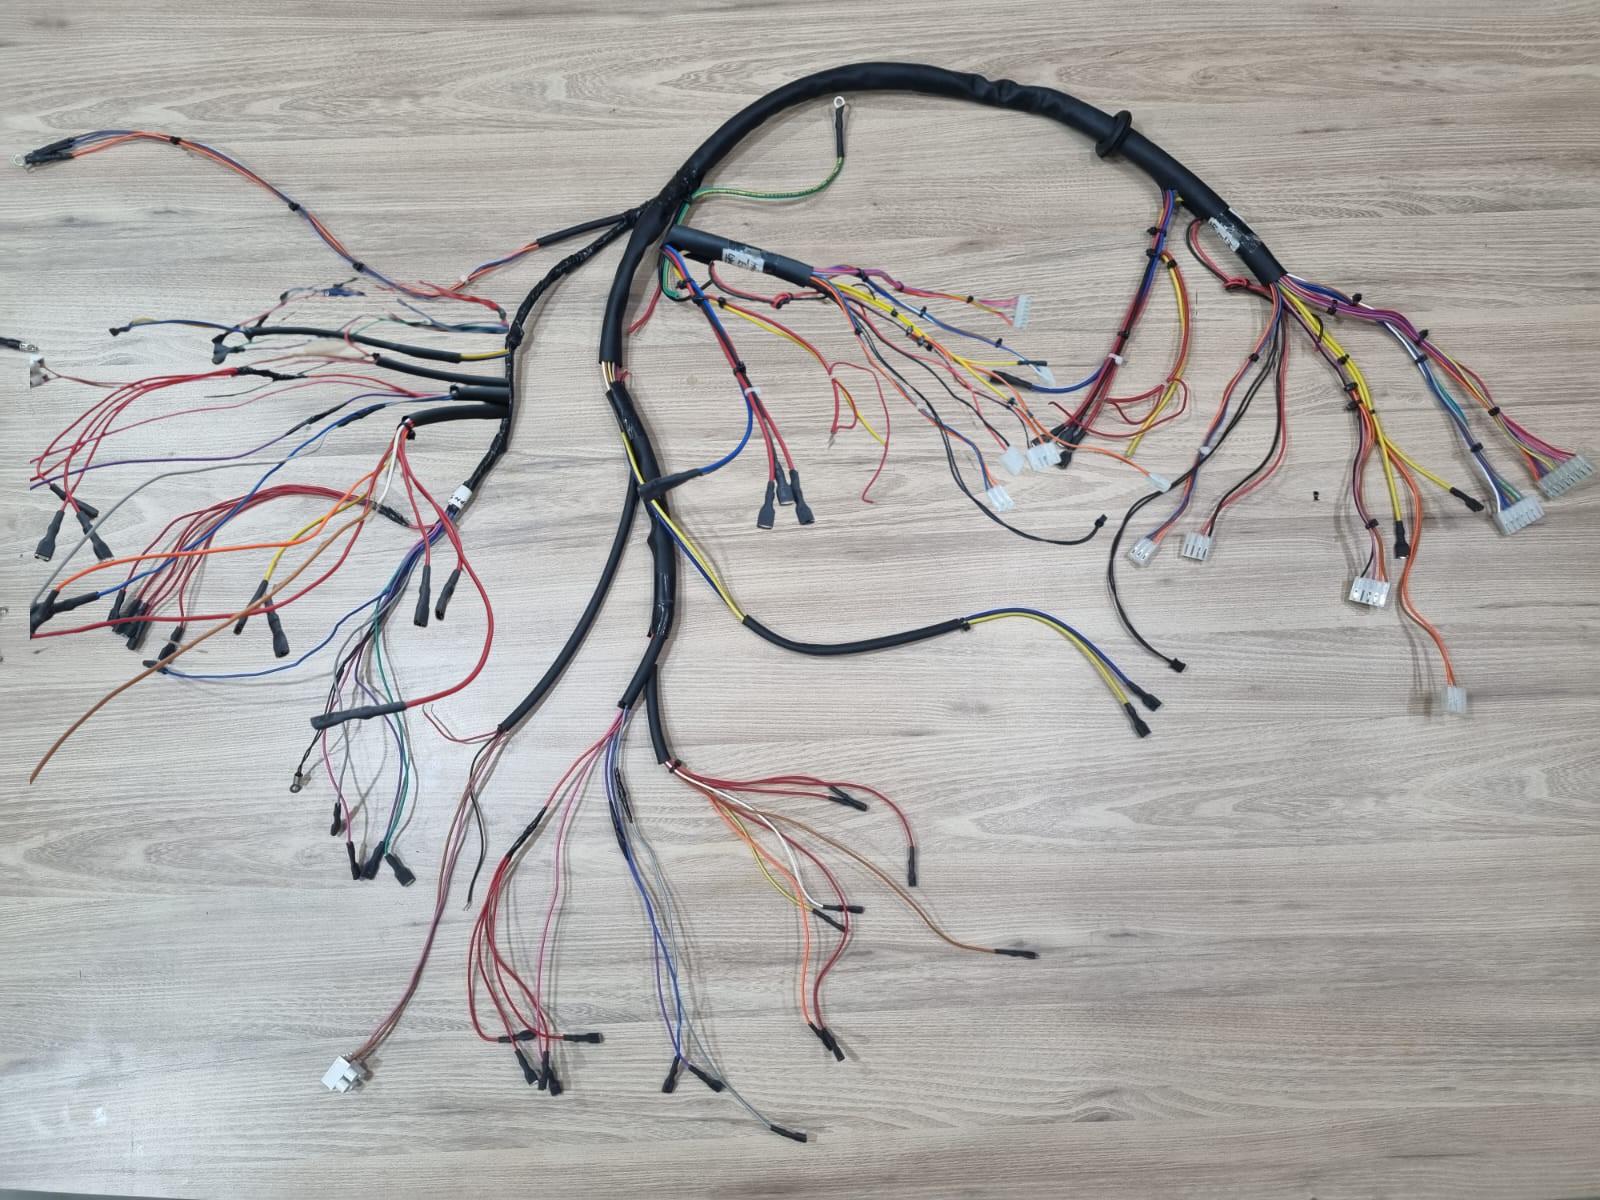 Customised wire harness and assembly